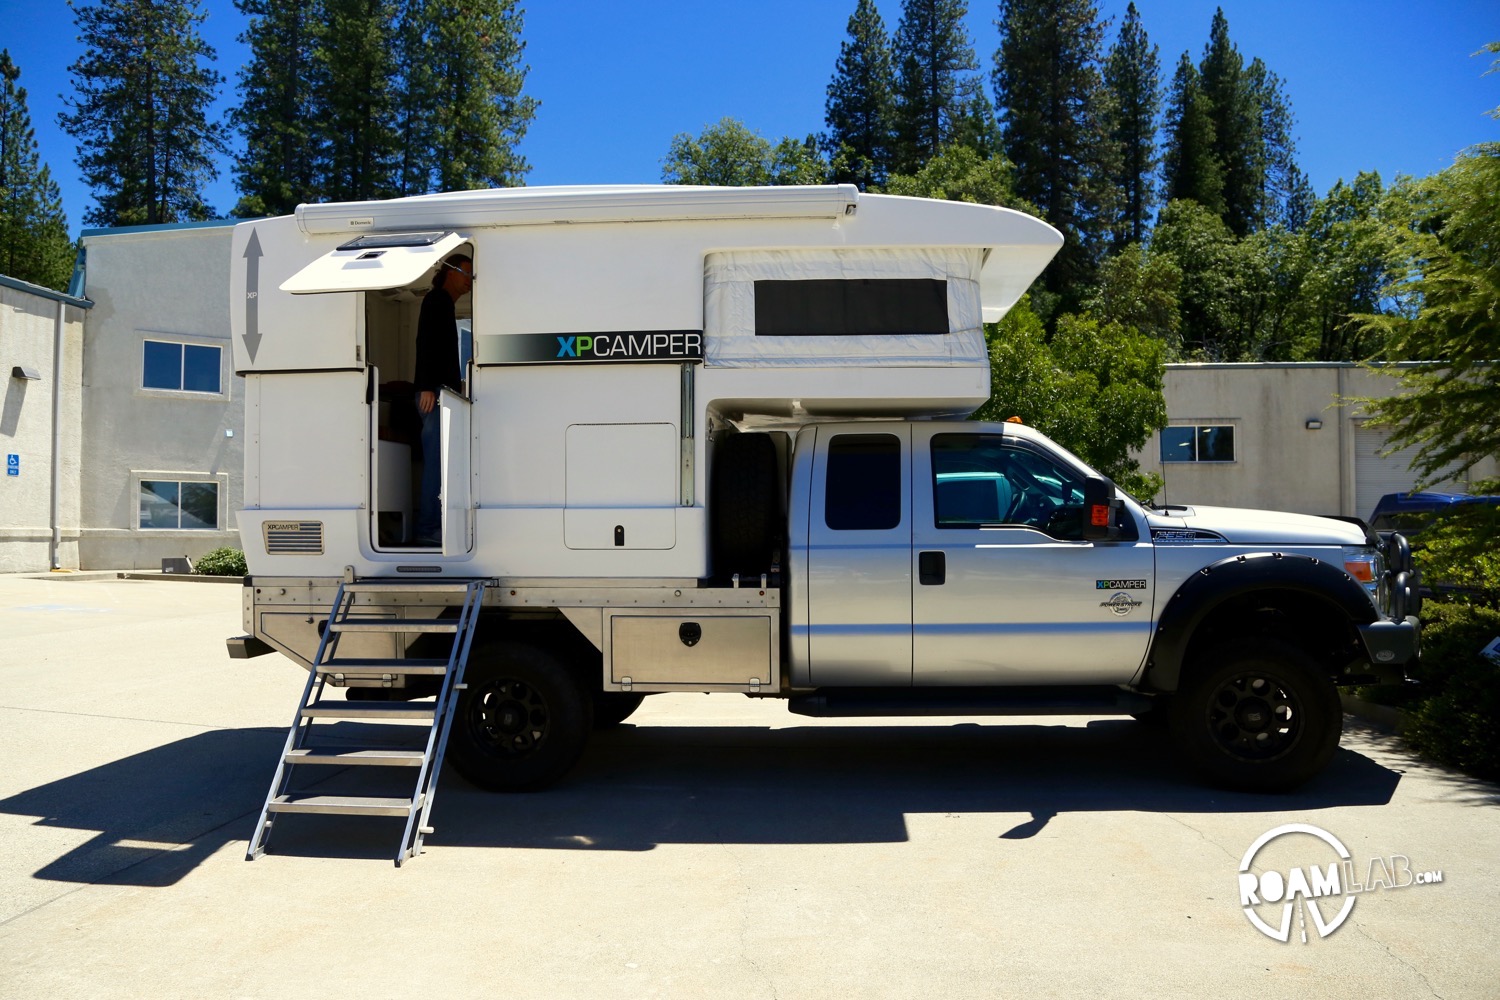 This is a fully expanded XP Camper. The section above the truck cab is fabric but everything else has hard siding. You can see a line along the center of the body where the top section slides over the bottom section when the camper is compressed. The side entrance allows a full width table with picture window at the back but means that this camper is not a slide in. The truck bed is converted to allow a full width camper. See the industrial metal base that is substituted for a truck bed.